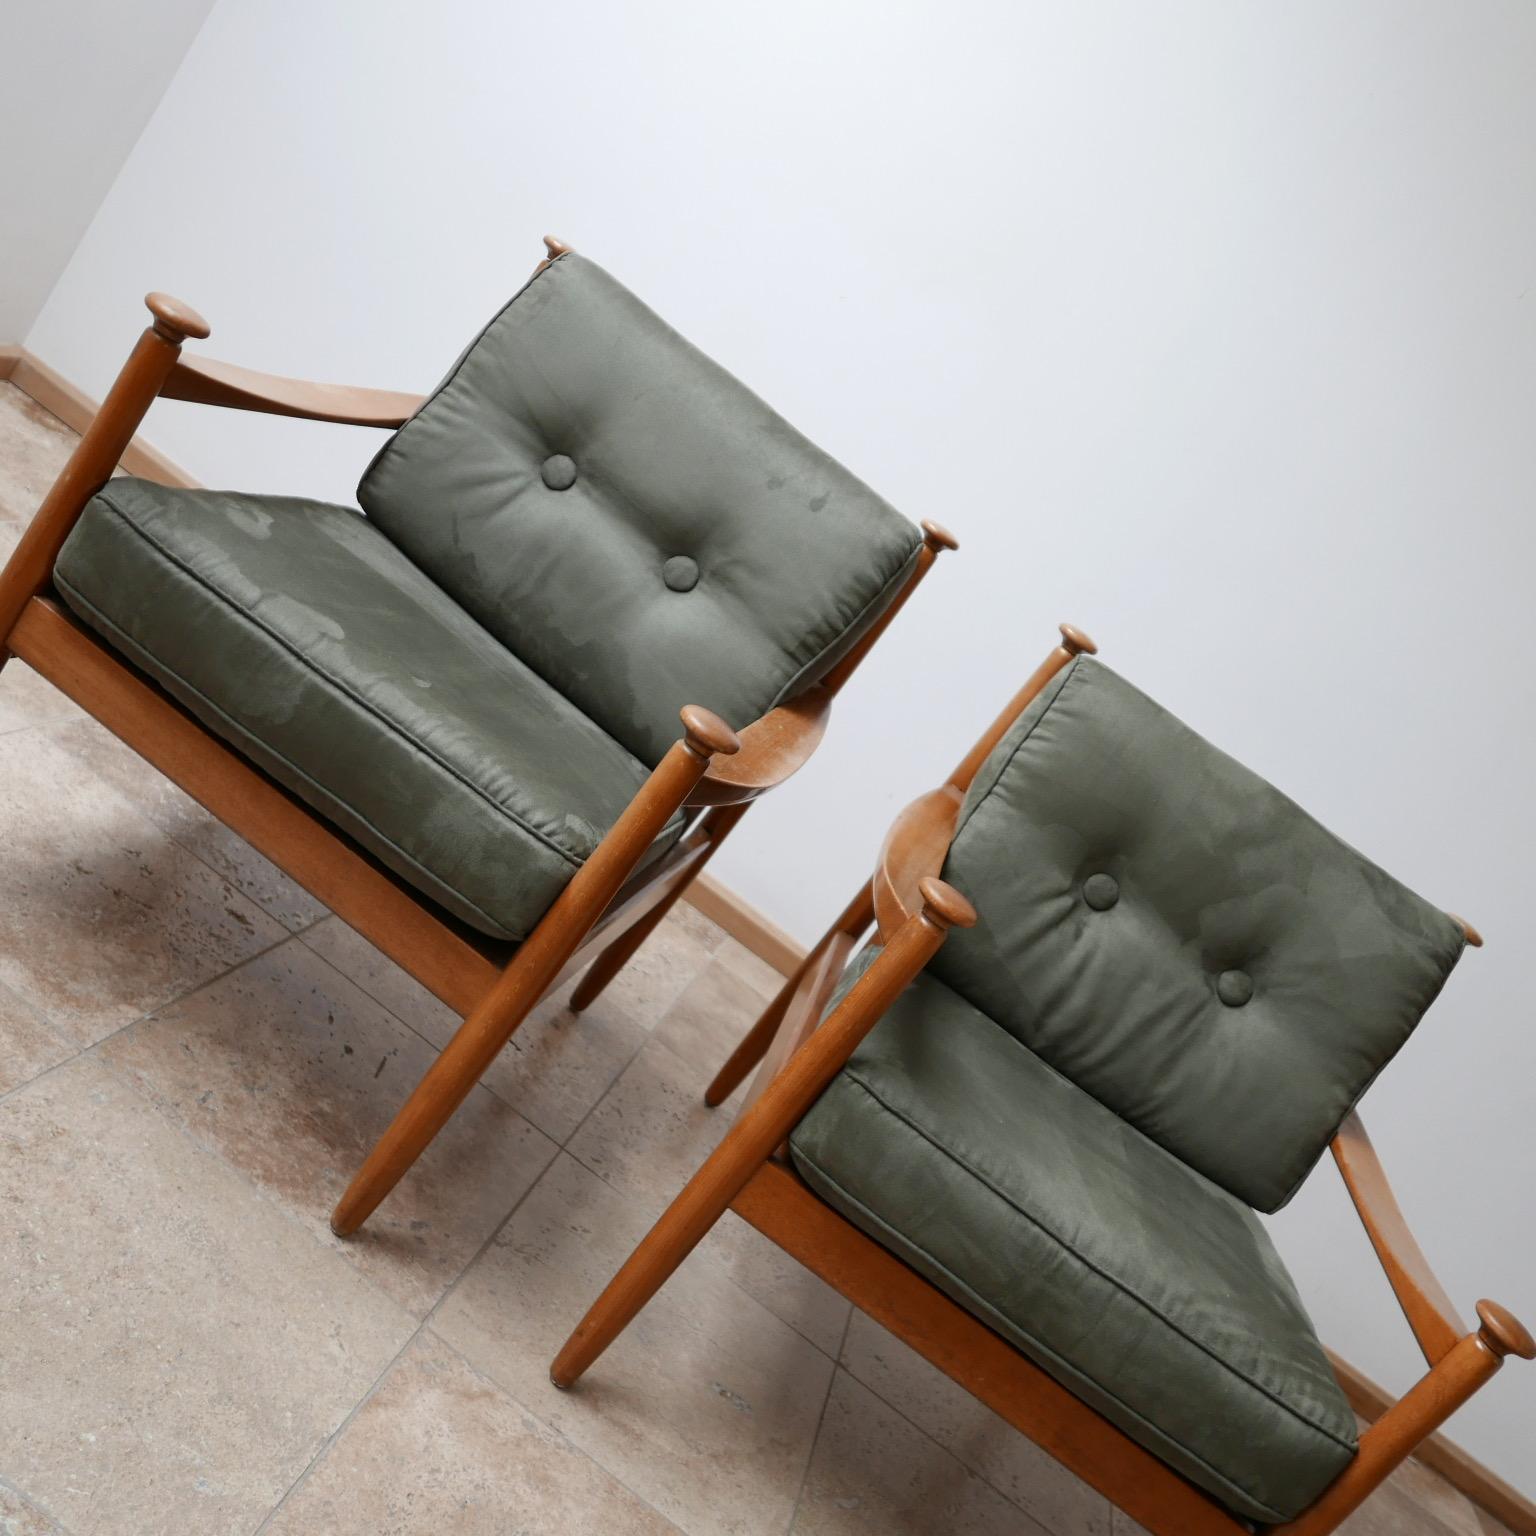 A pair of midcentury armchairs. 

Unattributed but clearly well formed design. 

The arm rests terminate in a turned ovals that are strangely tactile and comforting. 

The upholstery is clearly new (not by us) but is over stuffed in some